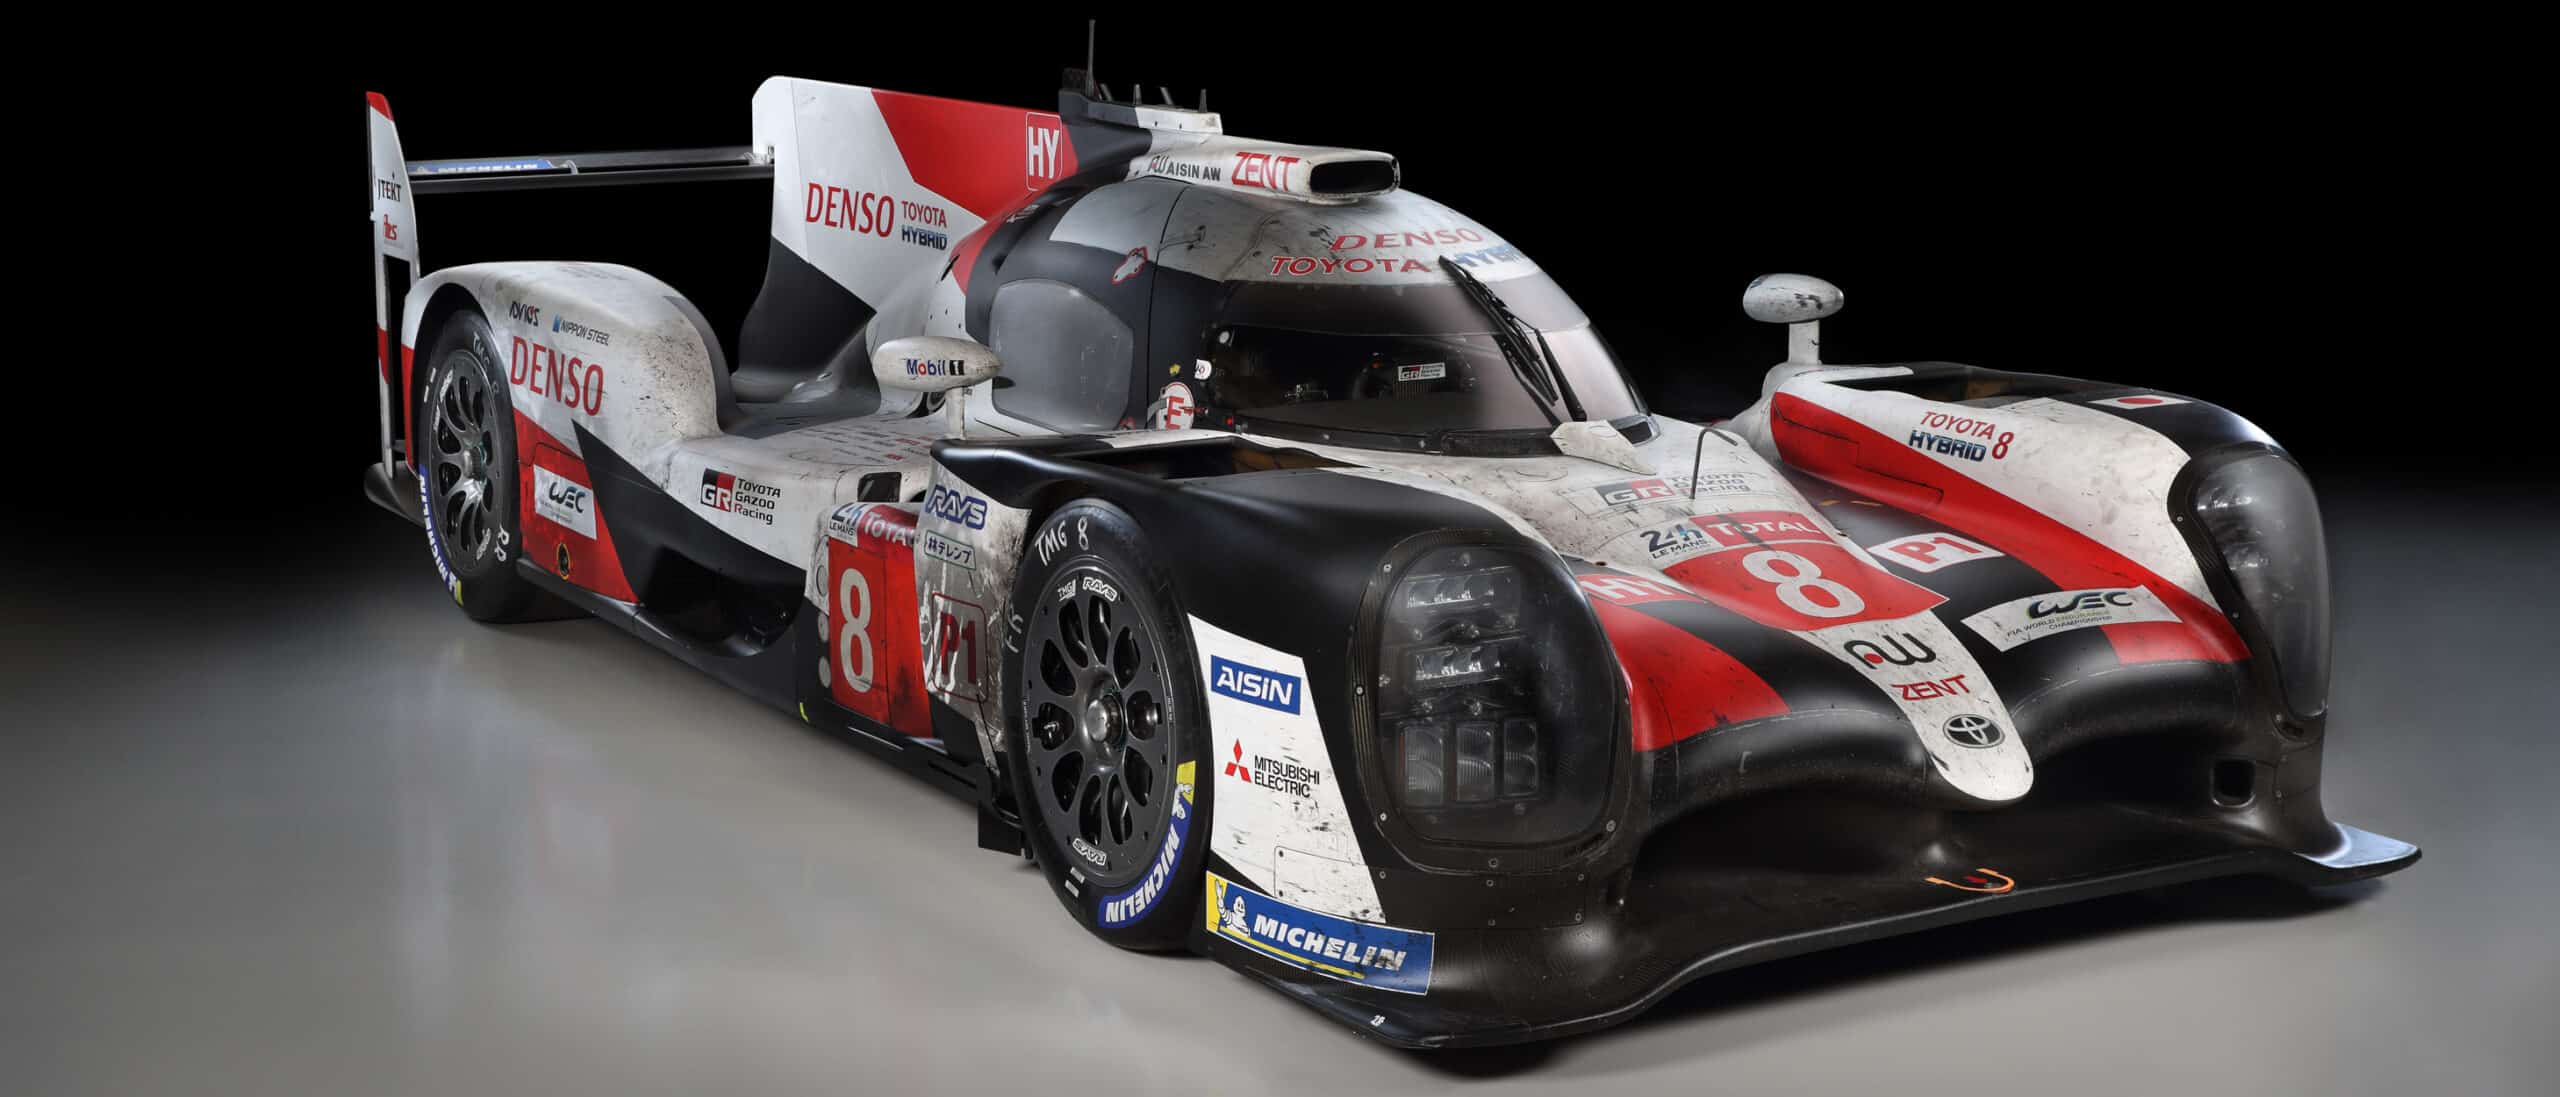 TOYOTA AT LE MANS – A BRIEF HISTORY - Toyota Connect